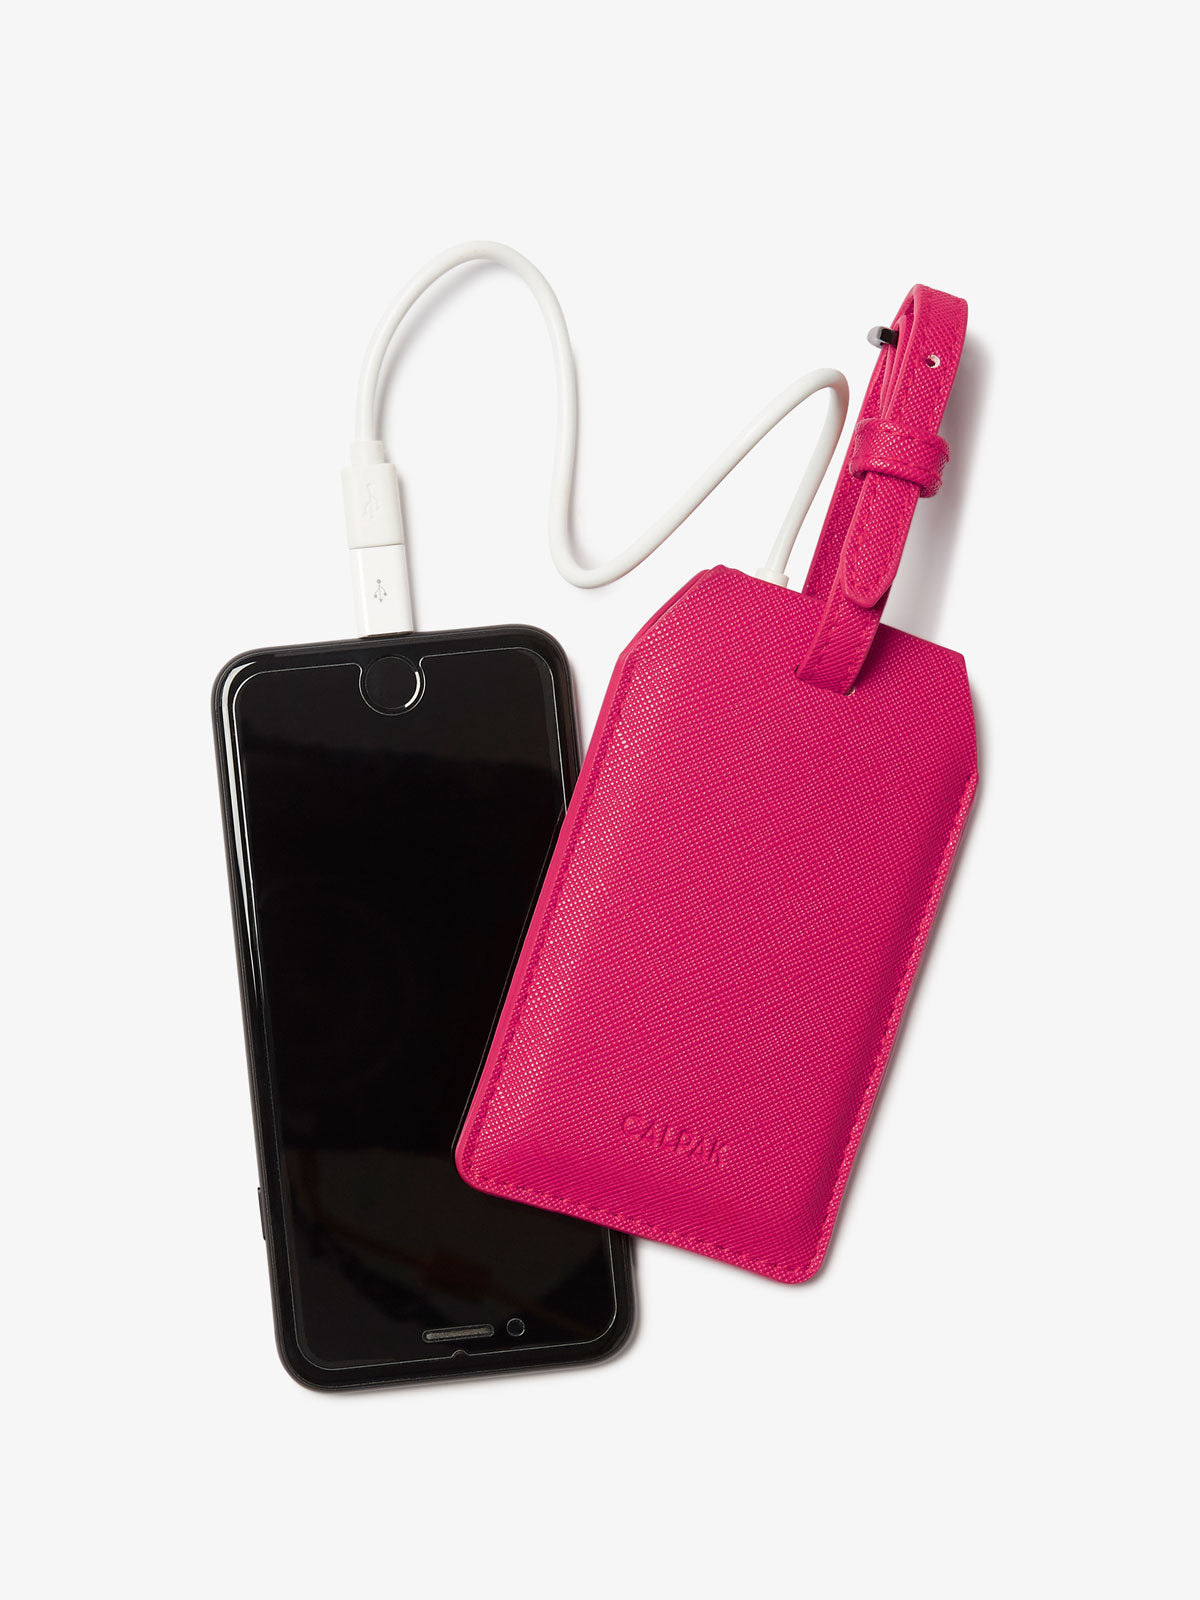 device with portable luggage tag charger